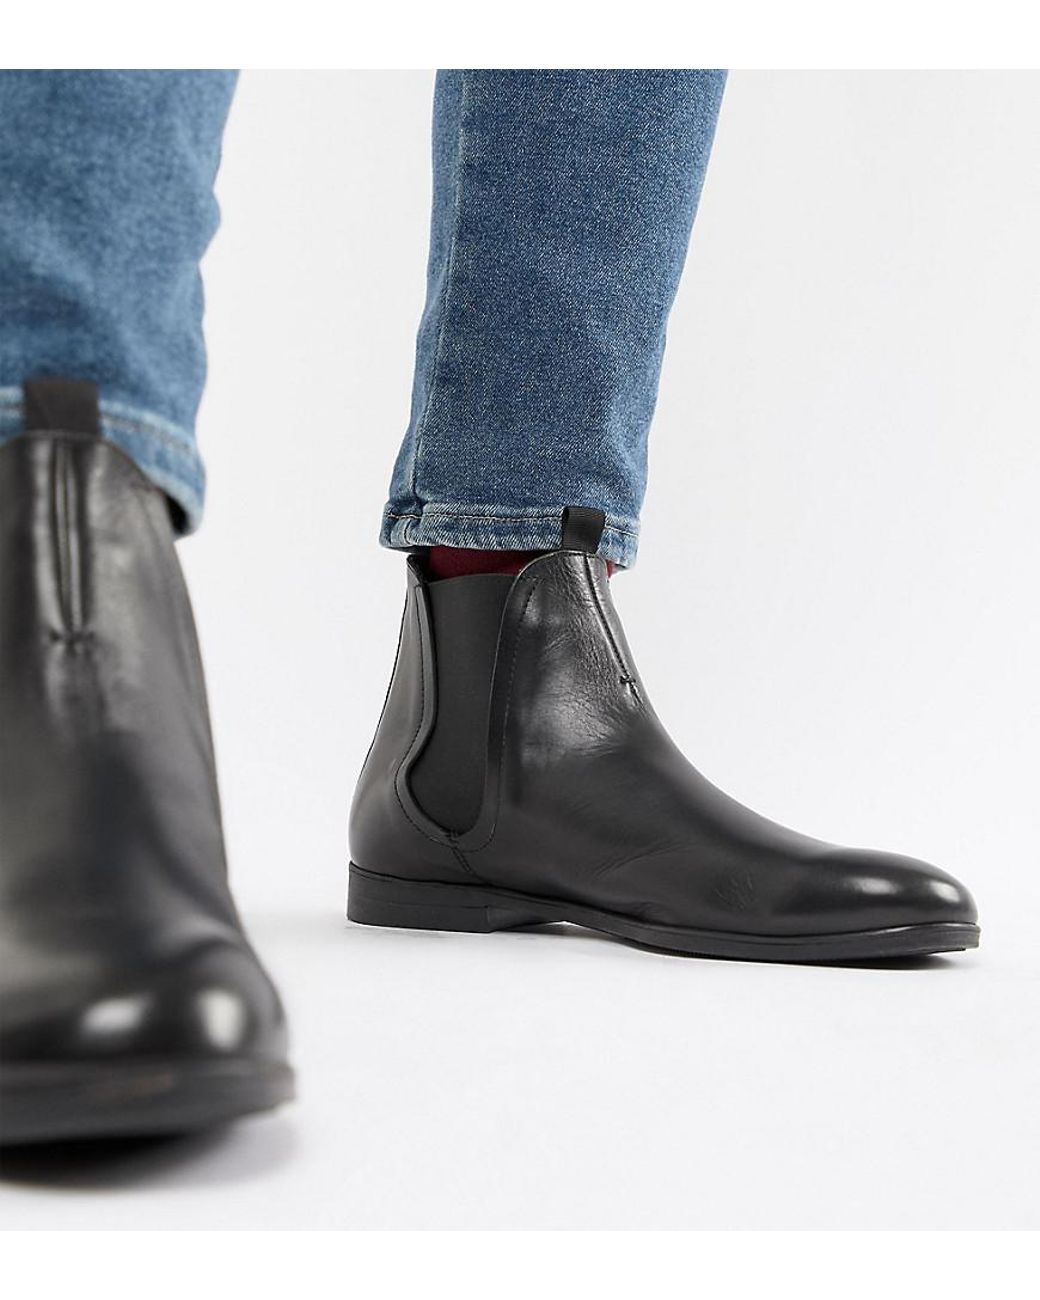 H by Hudson Wide Fit Atherston Chelsea Boots In Black Leather for Men |  Lyst UK